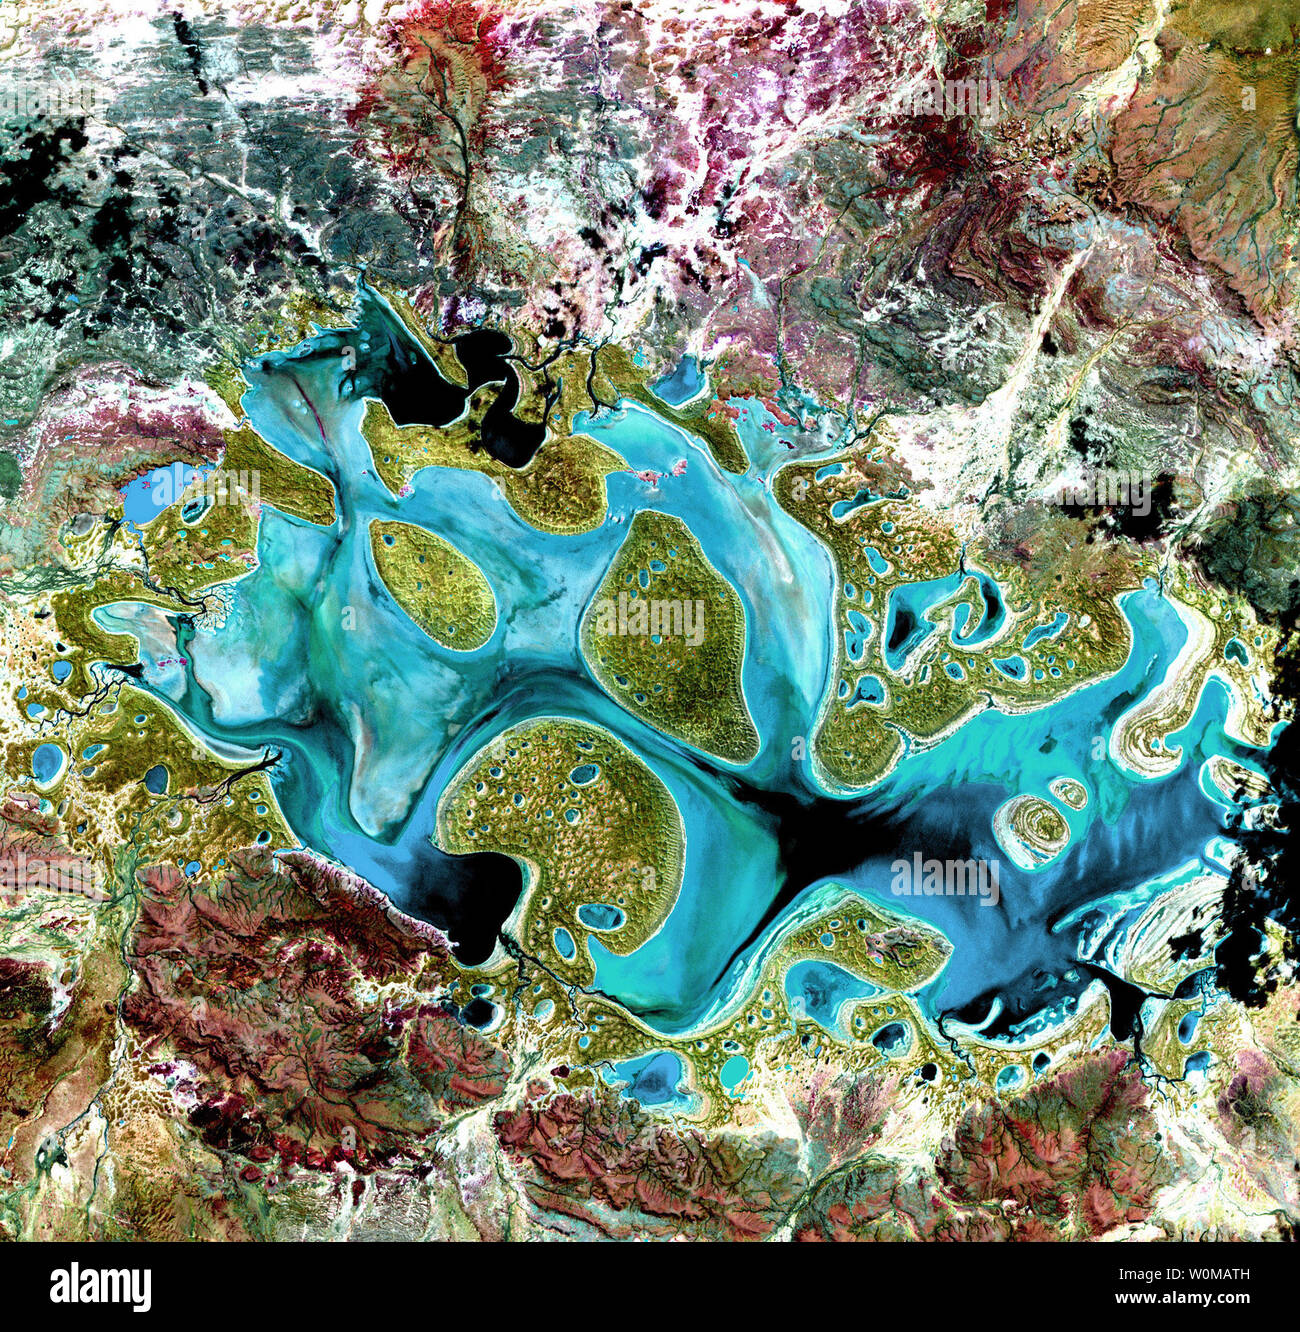 Ephemeral Lake Carnegie, in Western Australia, is shown filled with water after a period of significant rainfall. In dry years, it is reduced to a muddy marsh. This image was acquired by Landsat 7's Enhanced Thematic Mapper plus sensor on May 19, 1999. It is a false-color composite image made using shortwave infrared, infrared and red wavelengths. The image was sharpened using the sensor's panchromatic band. (UPI Photo/NASA) Stock Photo